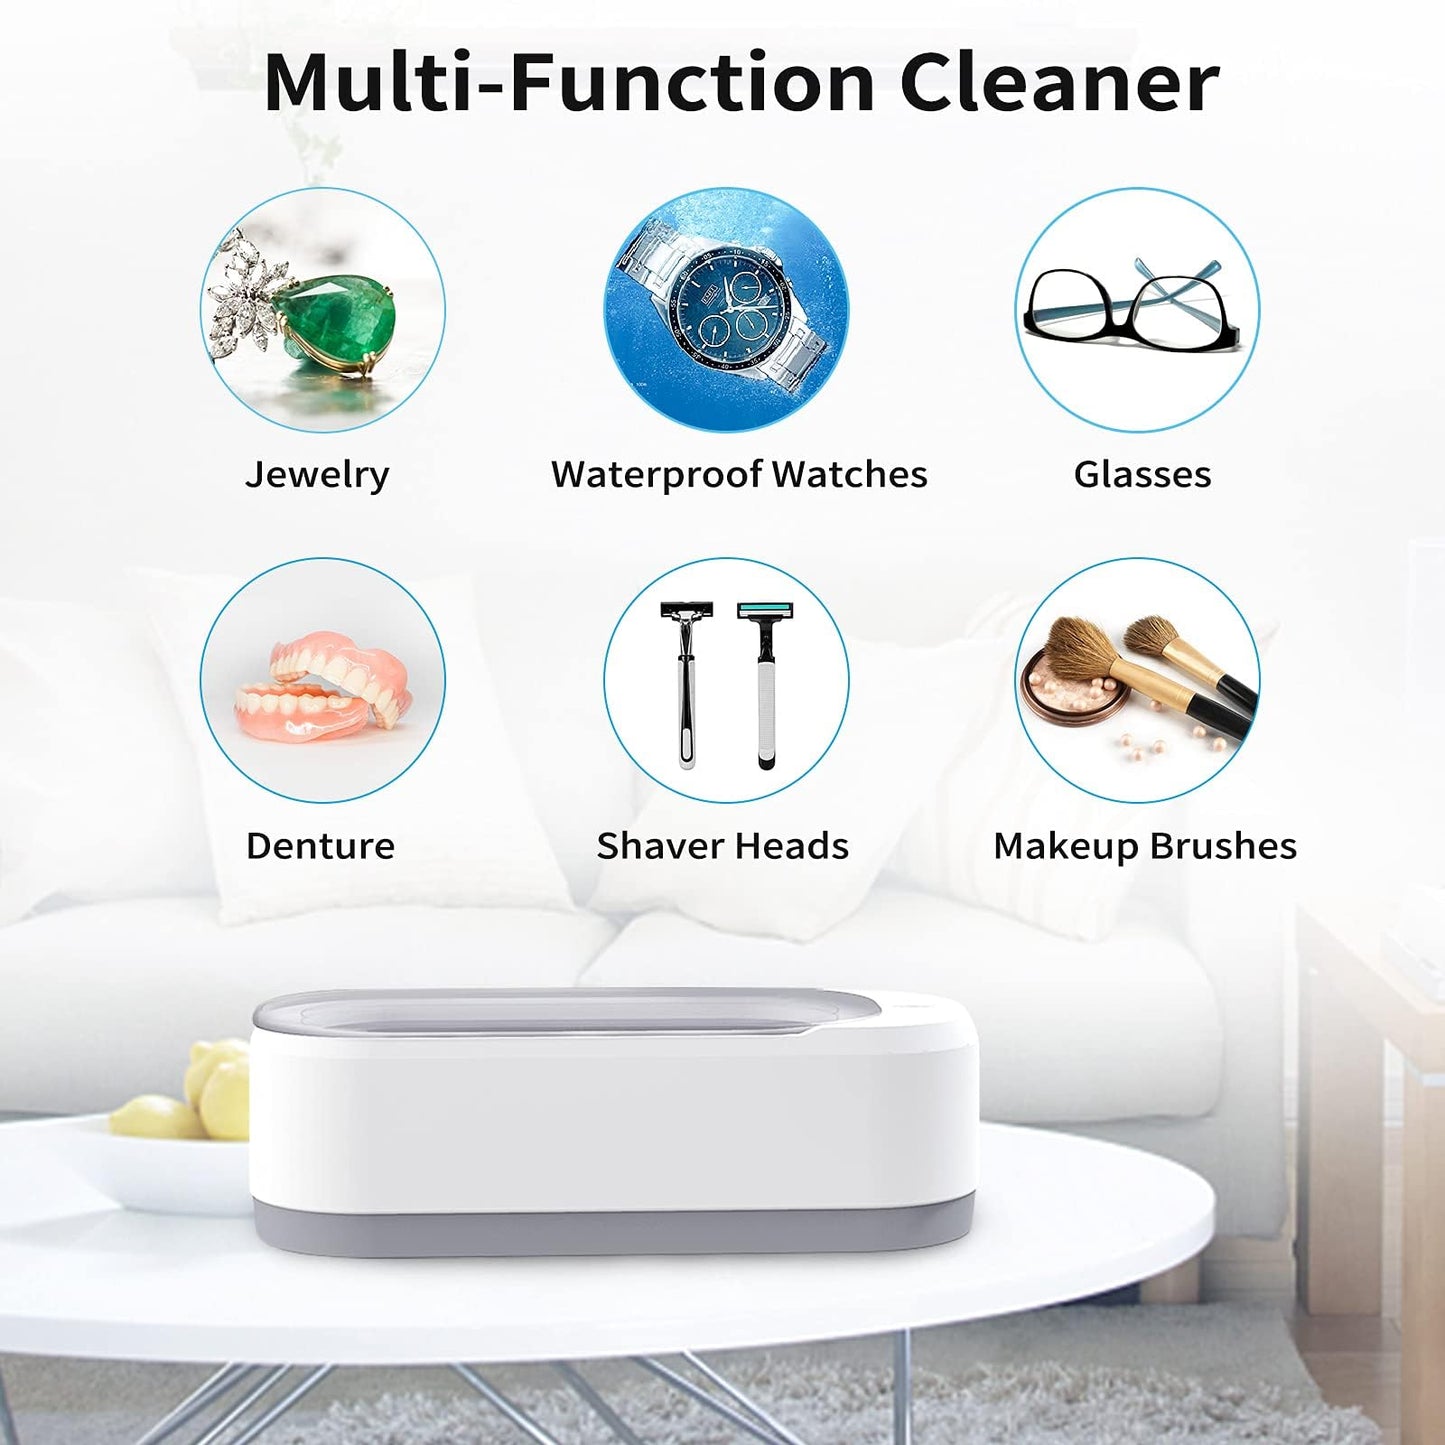 Ultrasonic Jewelry Cleaner, Jewelry Cleaner Machine with 12OZ, Professional Sonic Cleaner with One-Touch Operation, Ultrasonic Cleaner for Rings, Glasses, Jewelry, Dentures